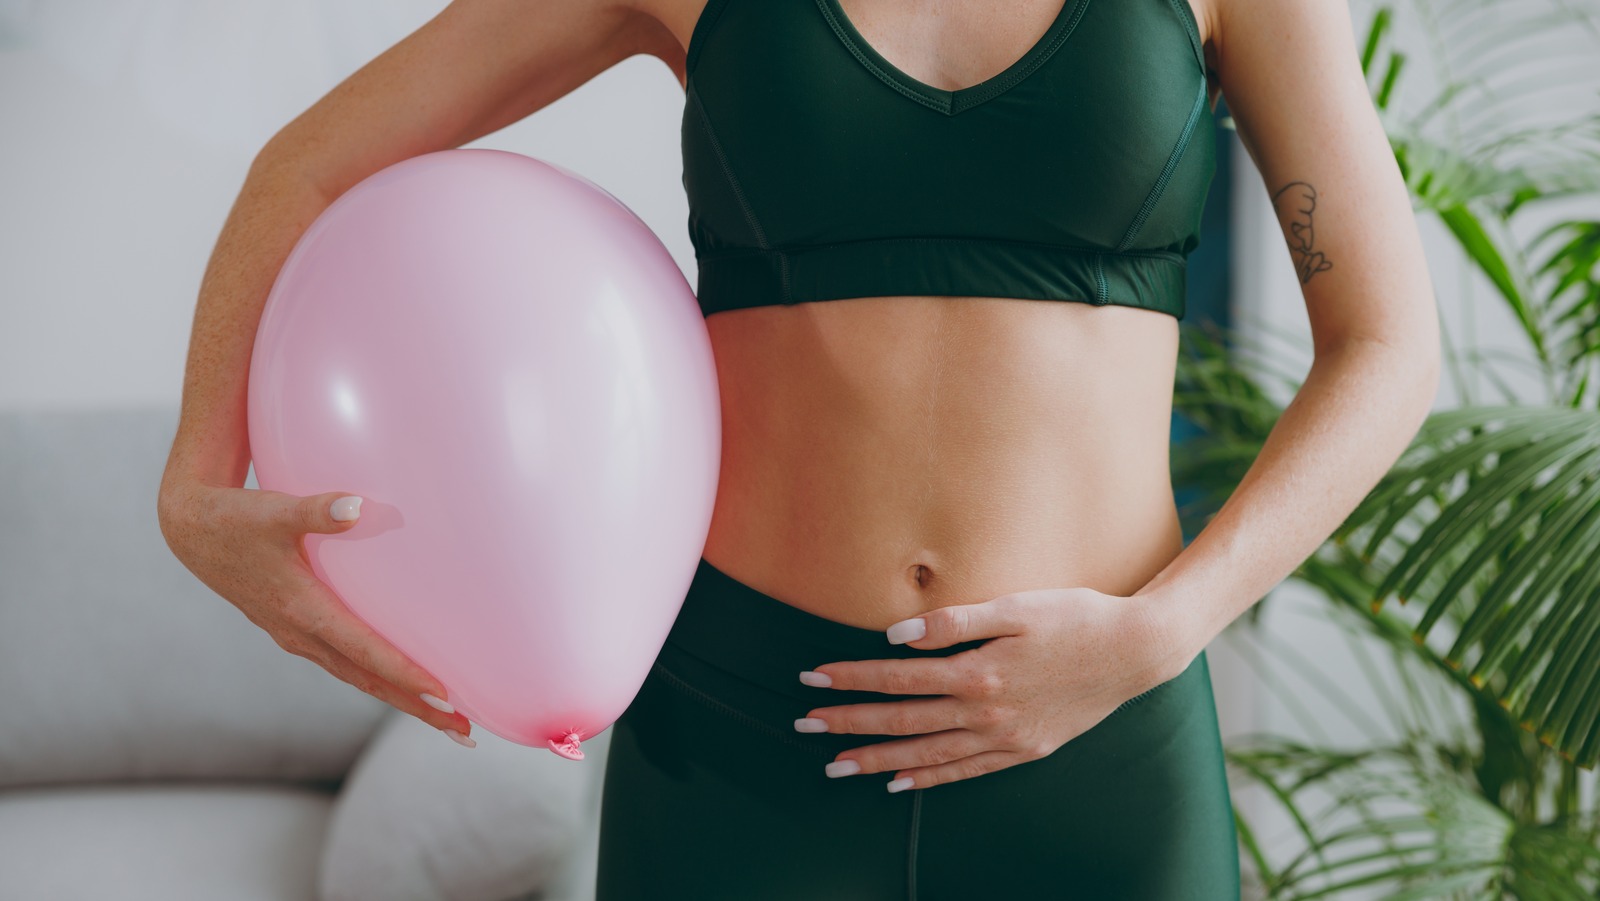 We Tried TikTok’s Viral Balloon Hack To Poop Instantly. Here’s How It Went – Health Digest